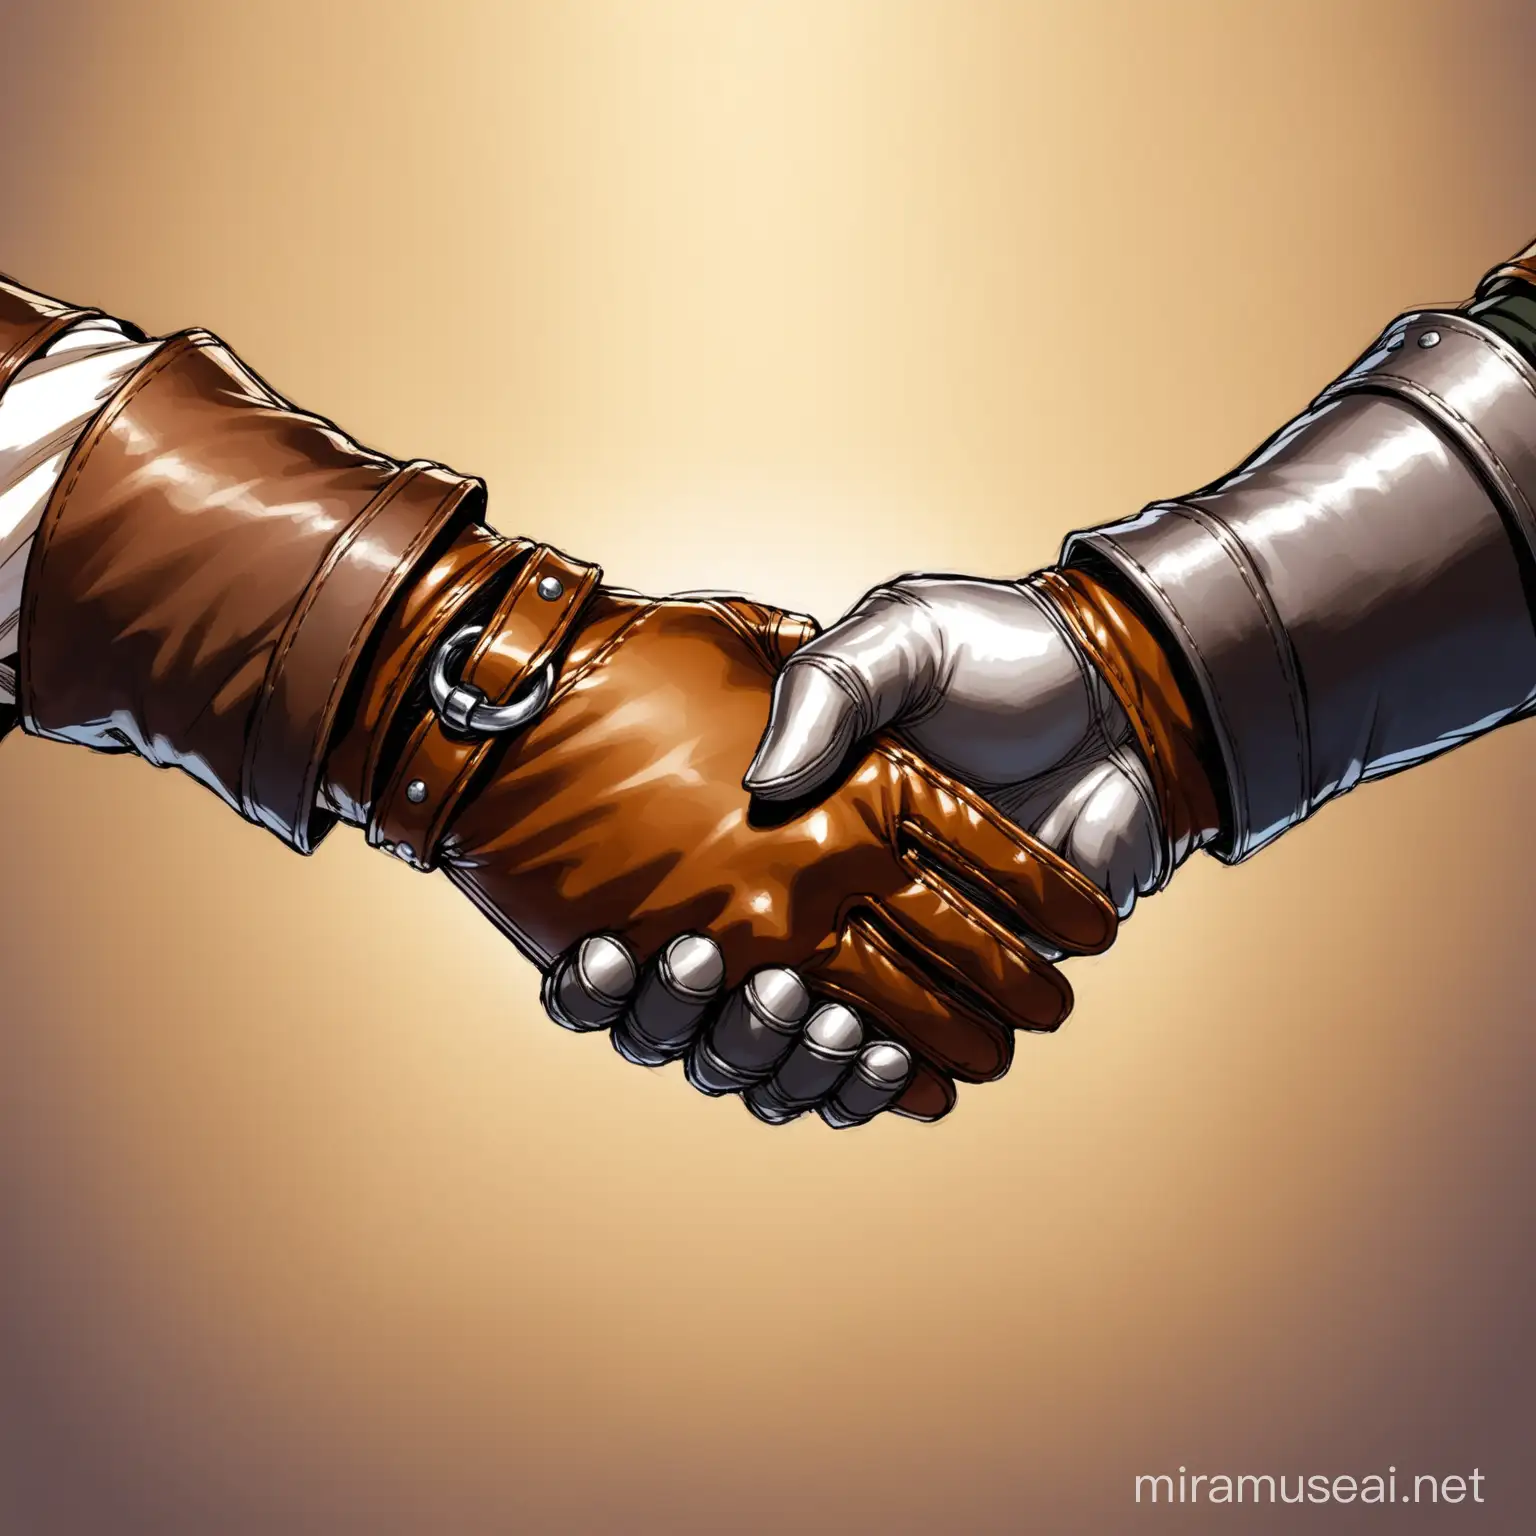 Medieval Leather Gloves Two Hands in Buddy Handshake Grip